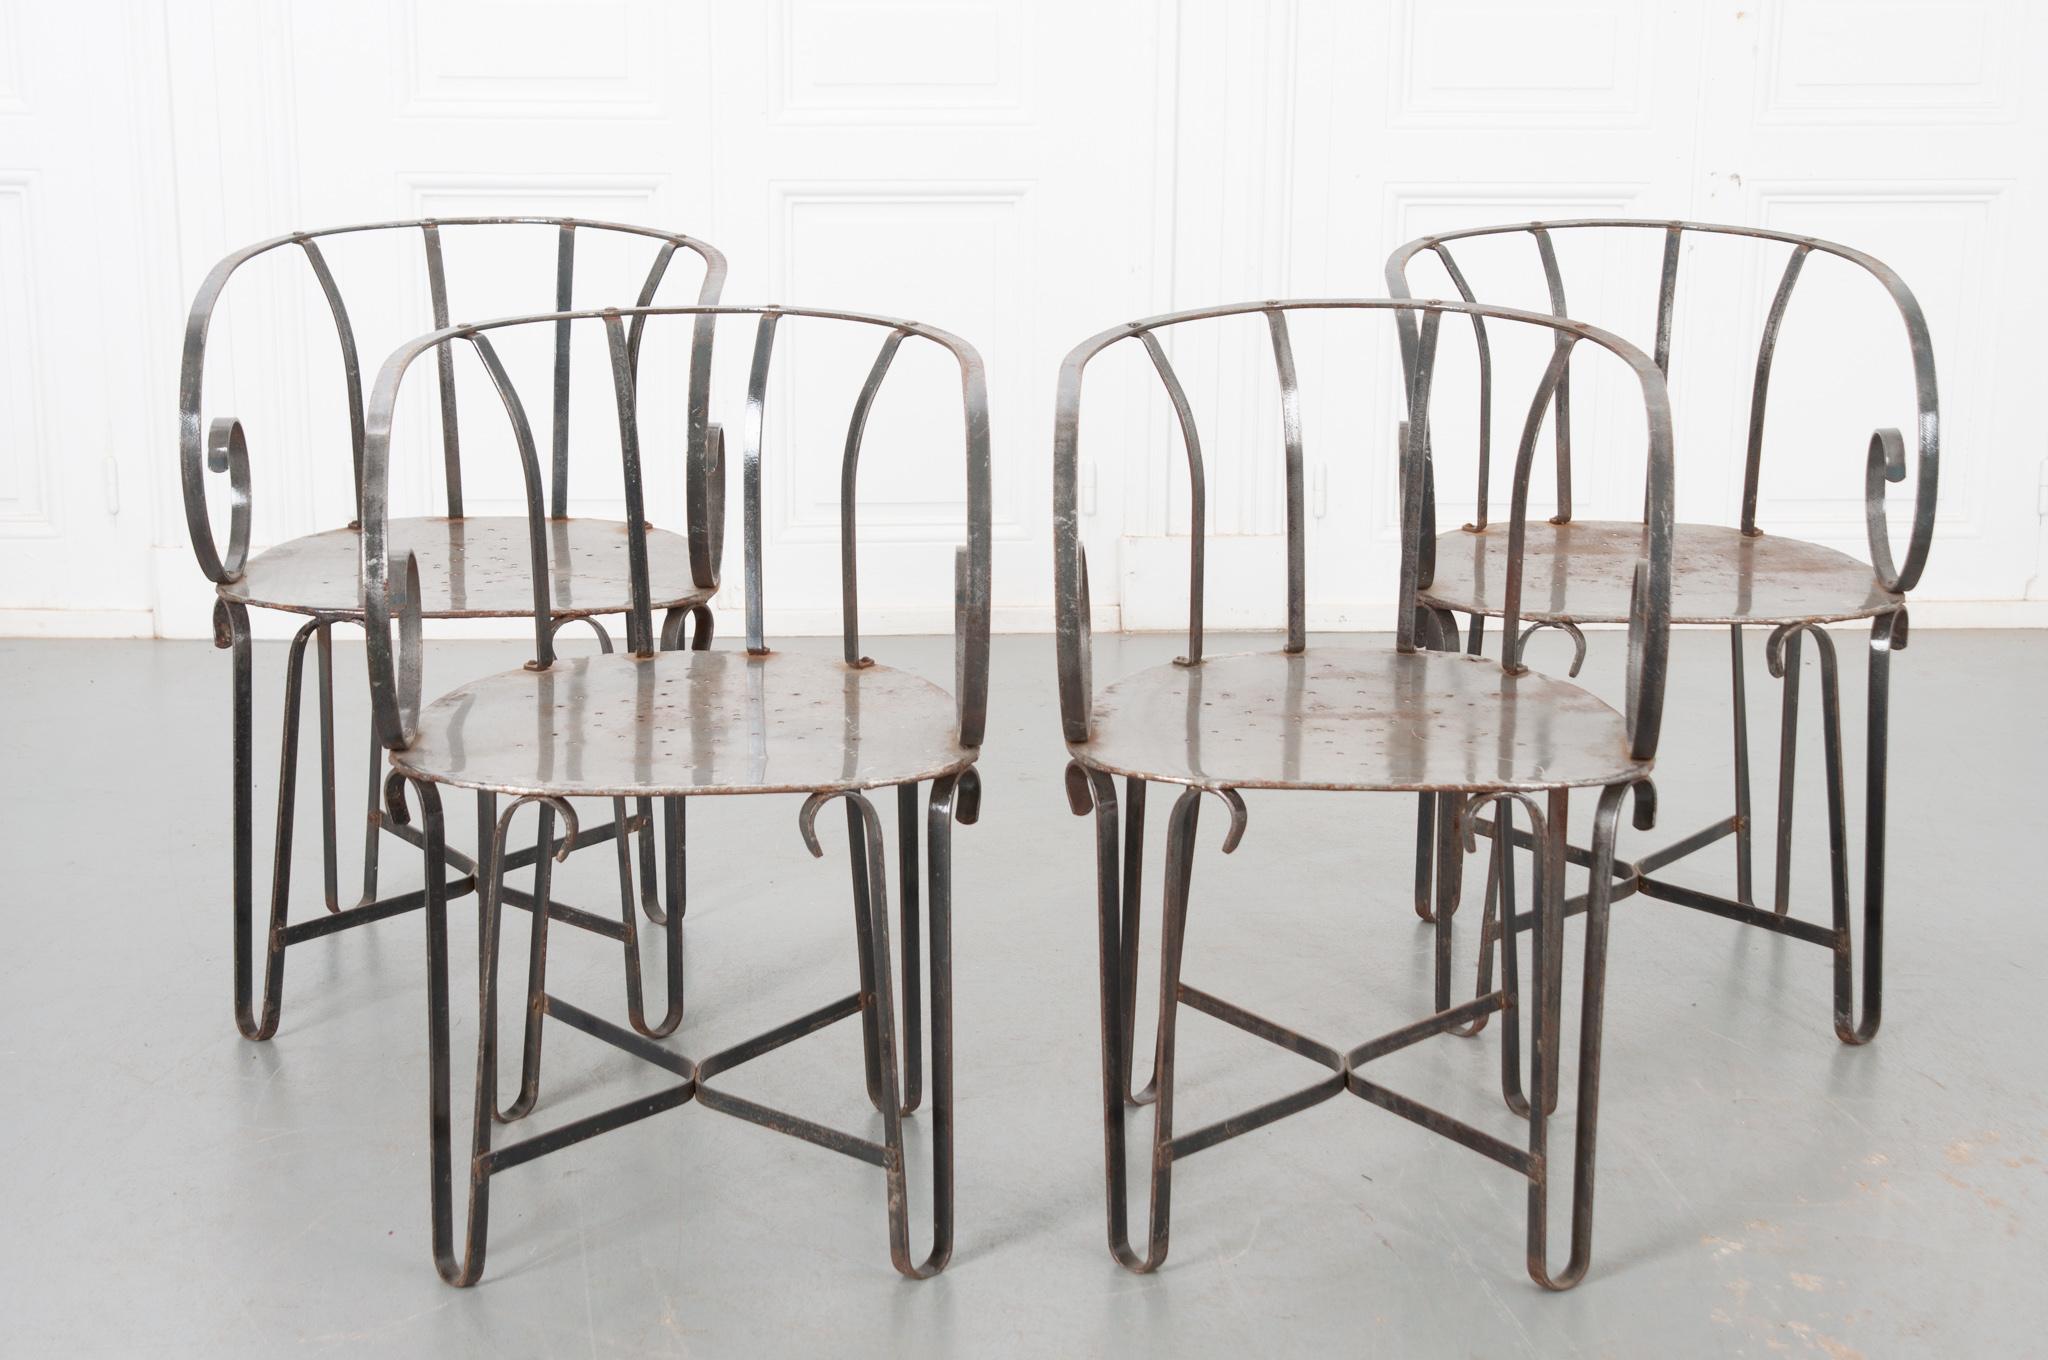 Other Set of 4 Vintage Scroll Arm Metal Chairs